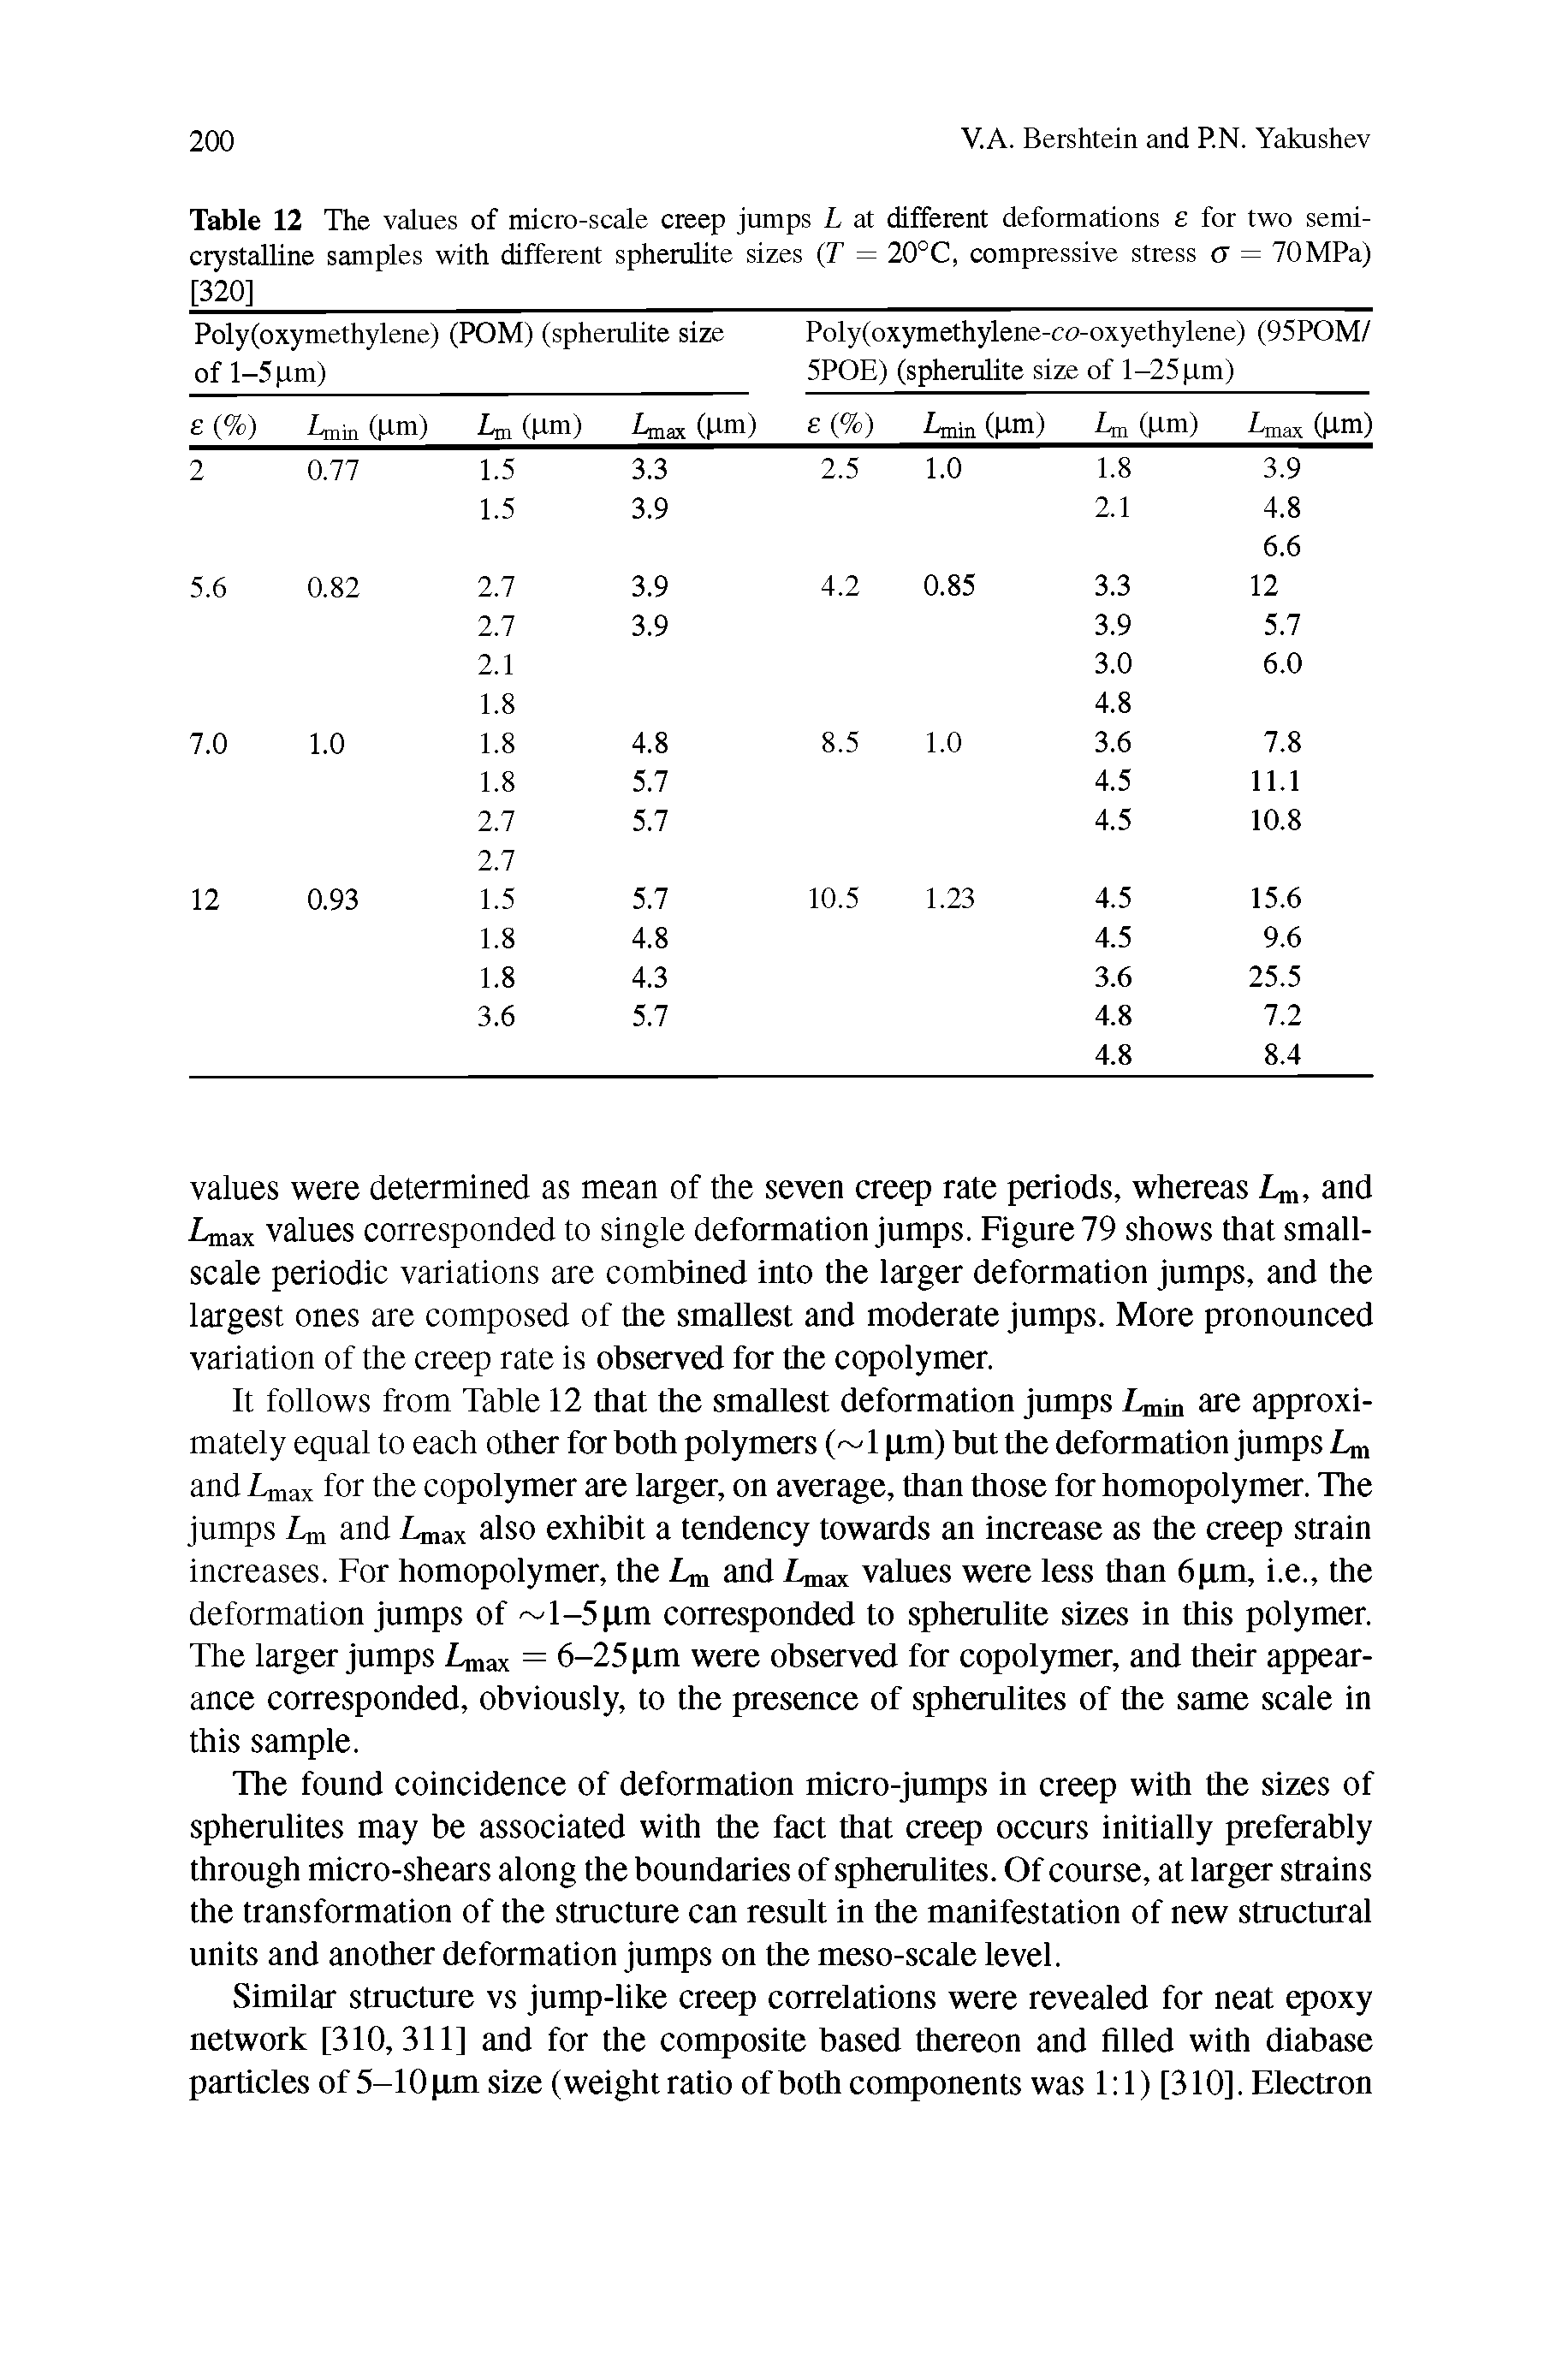 Table 12 The values of micro-scale creep jumps L at different deformations e for two semicrystalline samples with different spherulite sizes (T = 20°C, compressive stress cr = 70MPa) [320]...